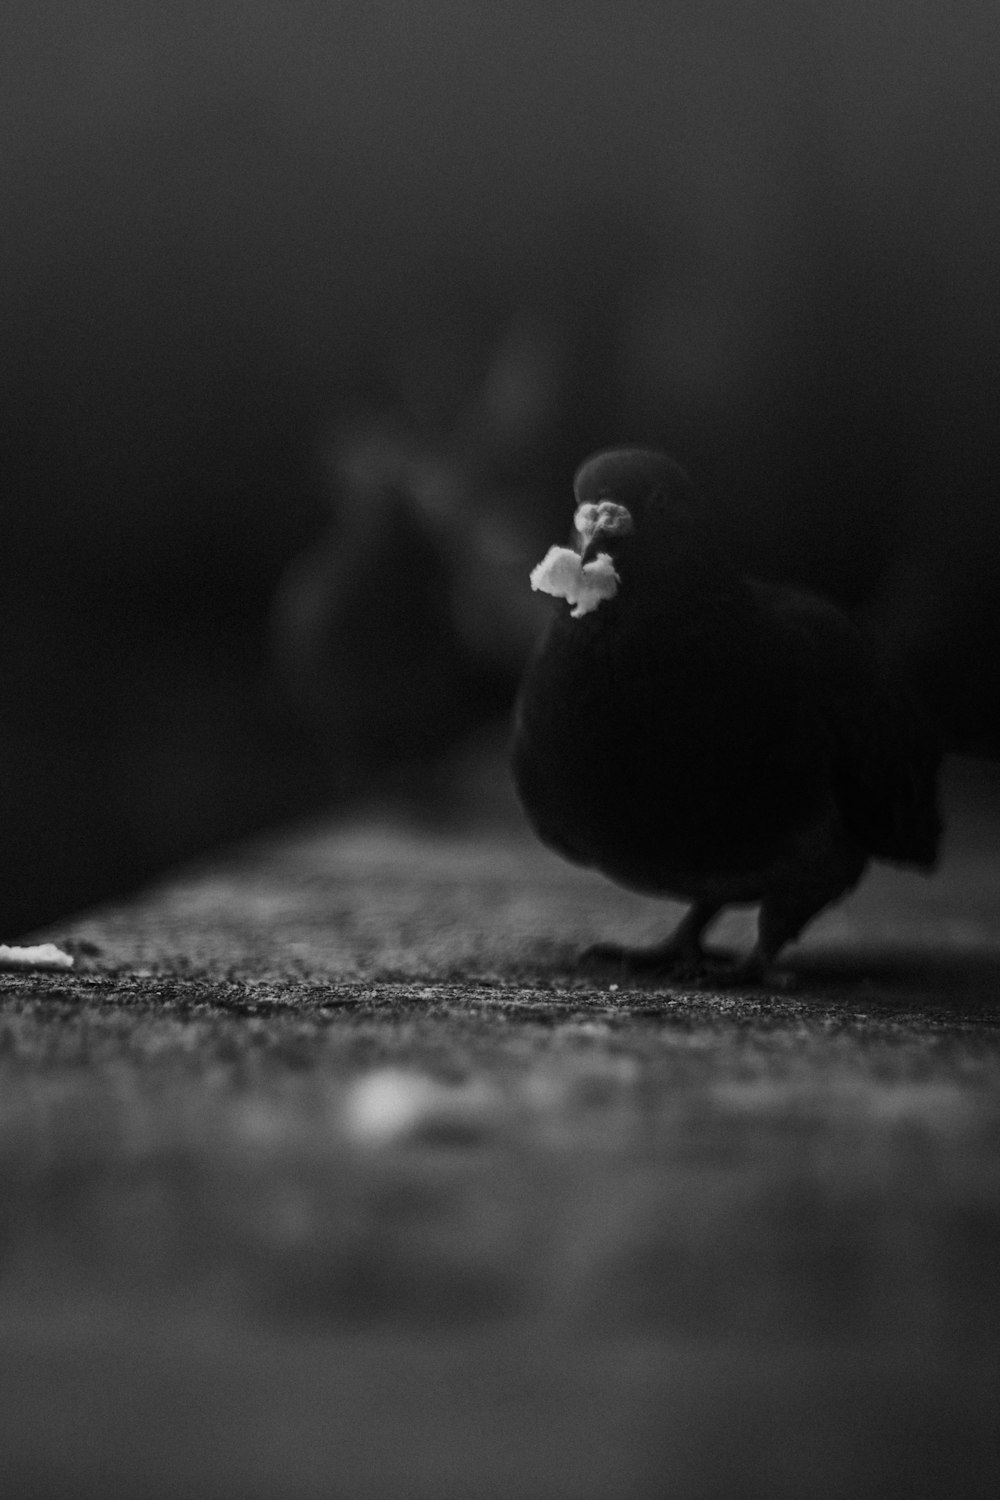 black and white bird on black and white surface